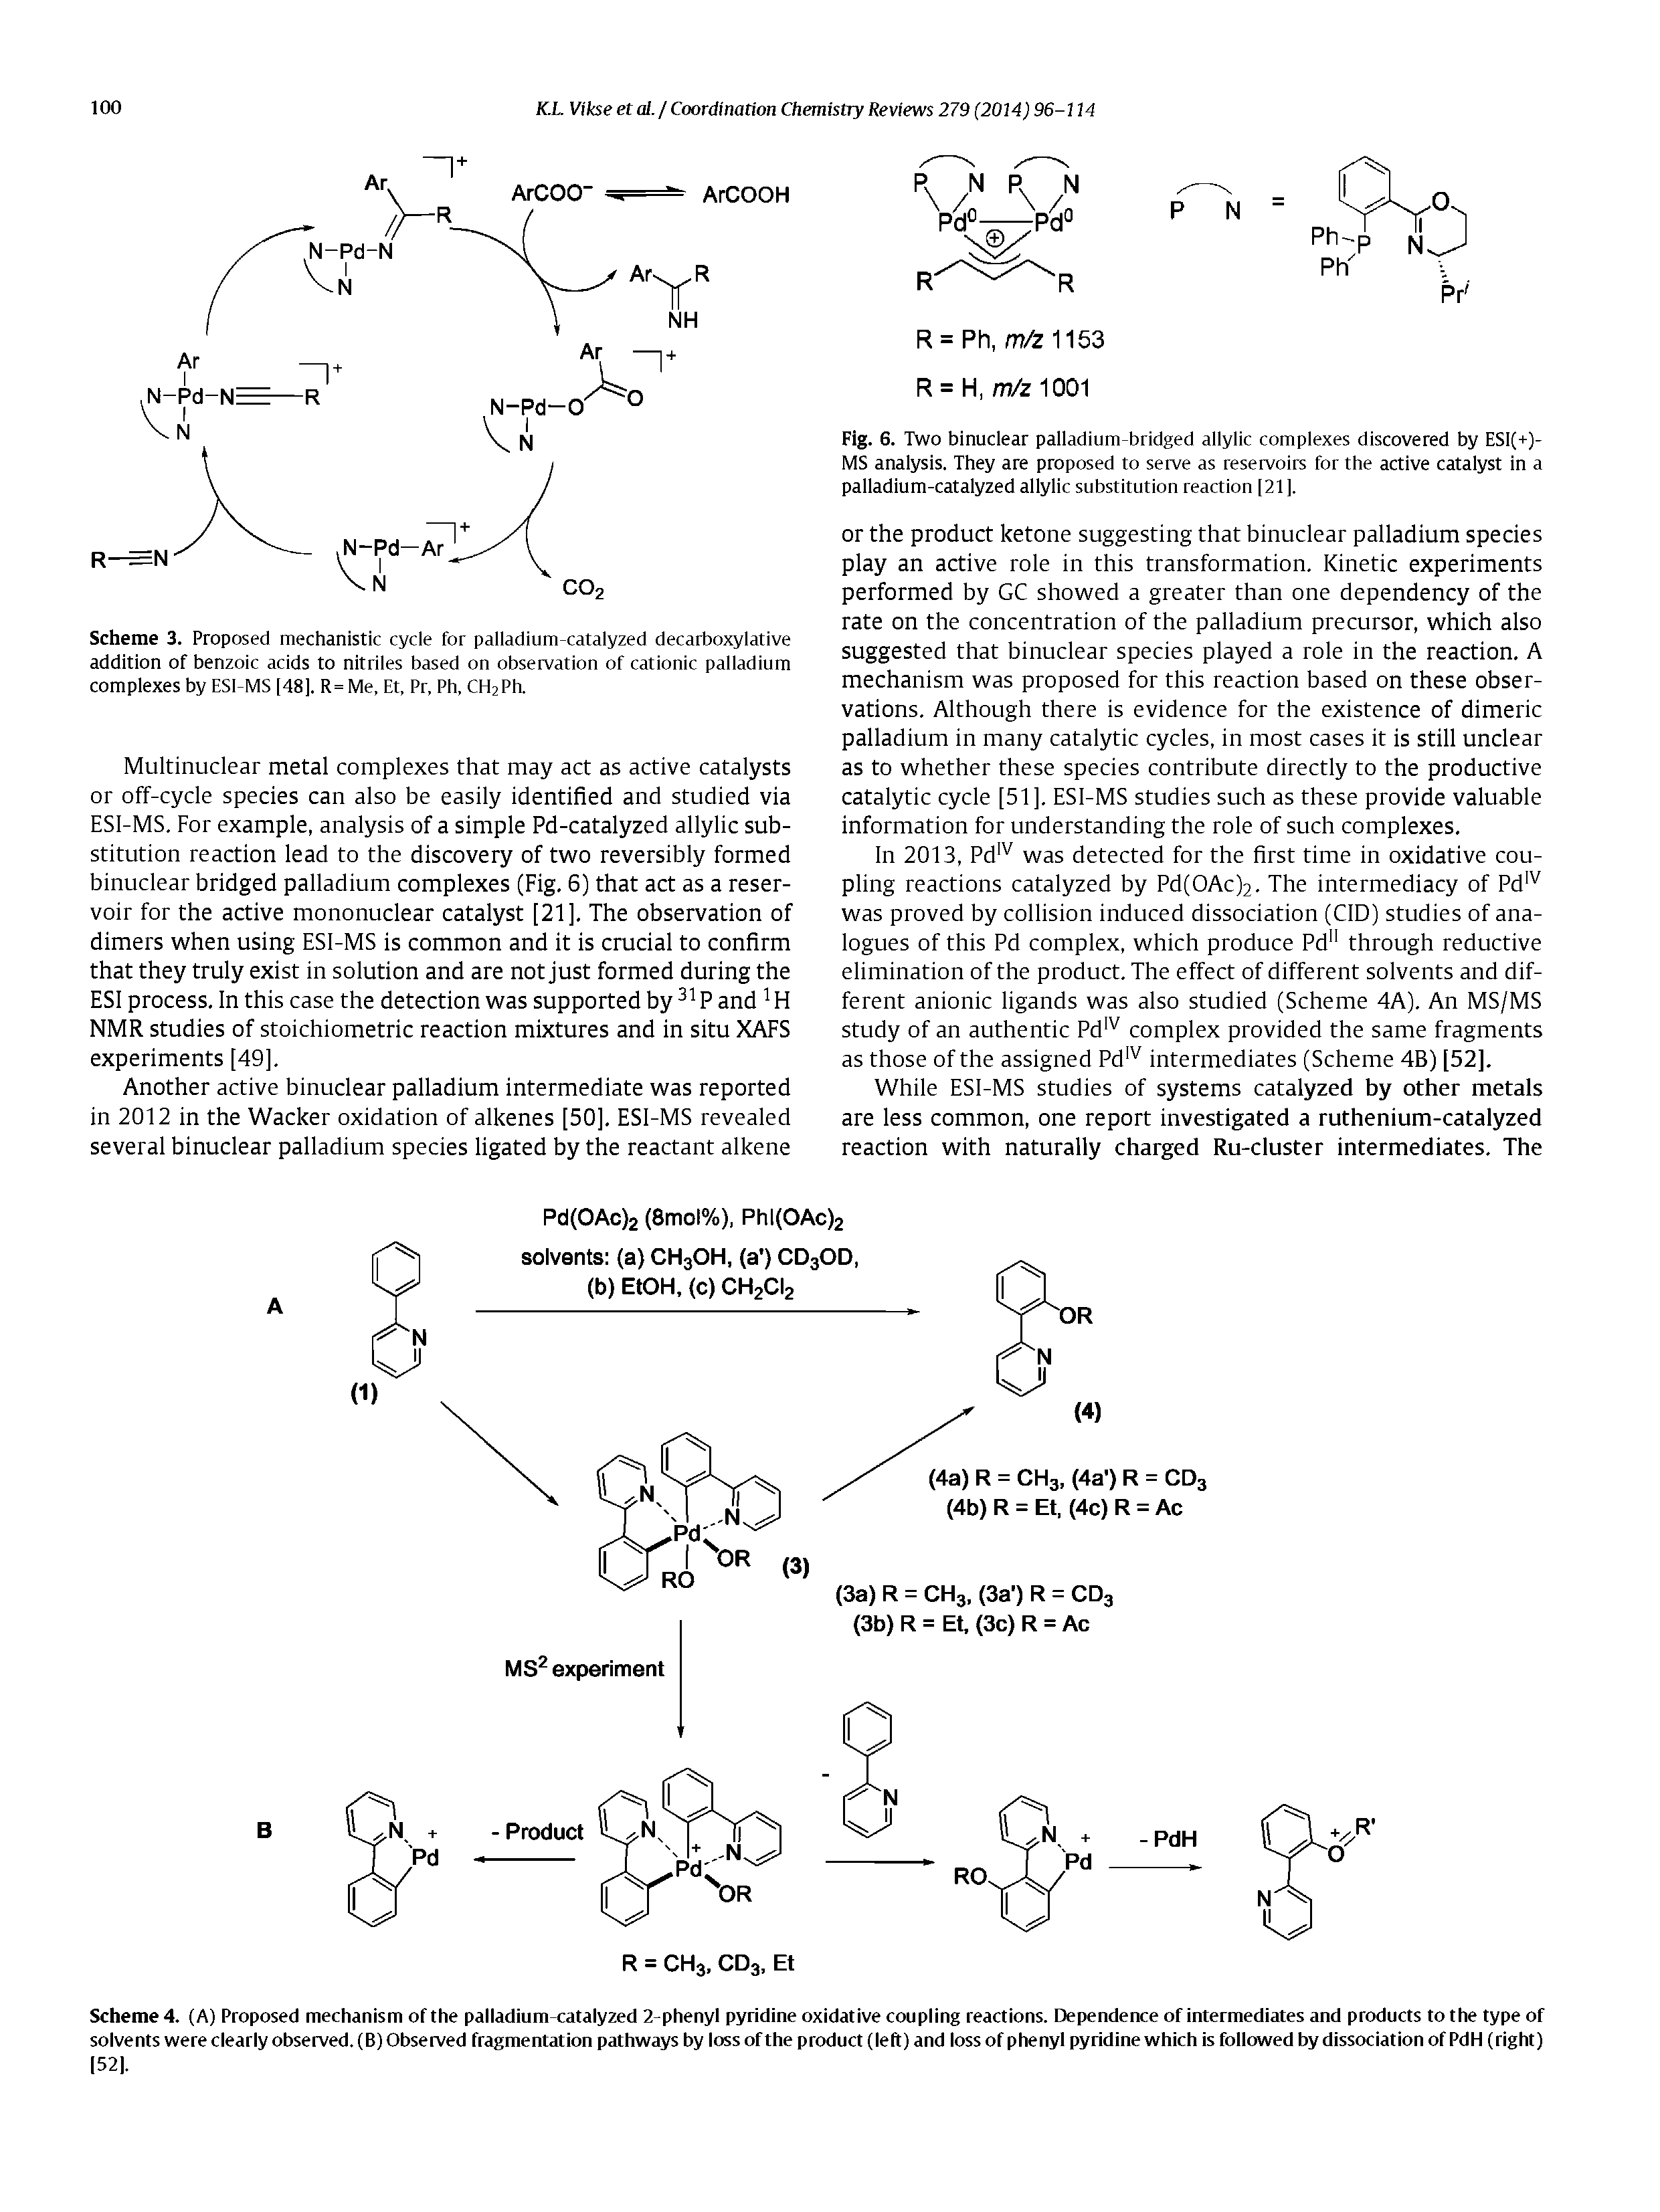 Scheme 4. (A) Proposed mechanism of the palladium-catalyzed 2-phenyl pyridine oxidative coupling reactions. Dependence of intermediates and products to the type of solvents were clearly observed. (B) Observed fragmentation pathways by loss of the product (left) and loss of phenyl pyridine which is followed by dissociation of PdH (right) 52. ...